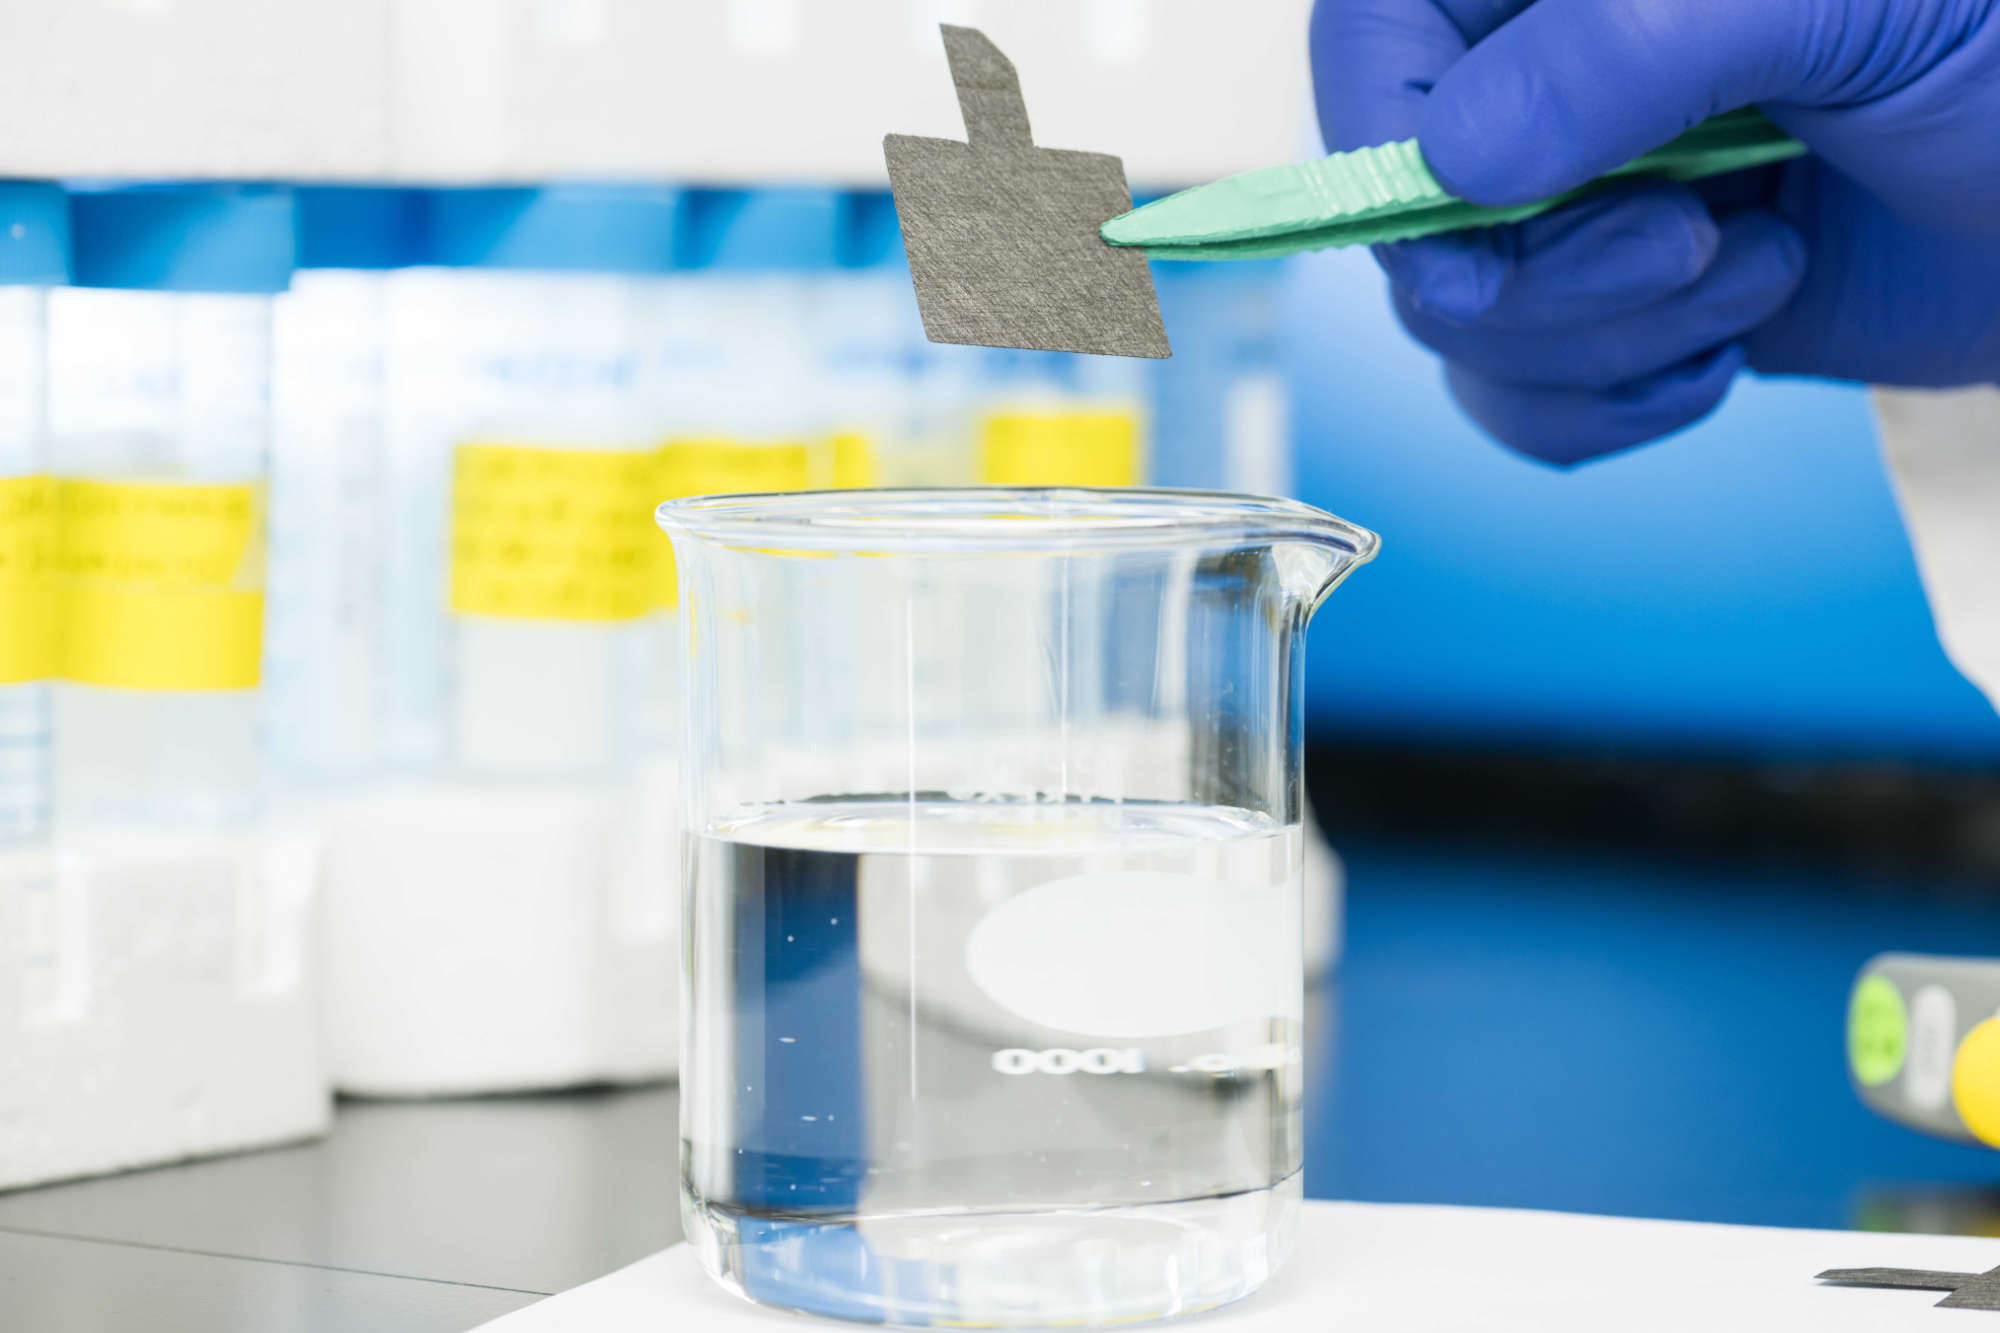 A gloved hands uses tweezers to hold carbon paper above a glass beaker filled with water to illustrate a new technique to remediate PFAS chemicals.